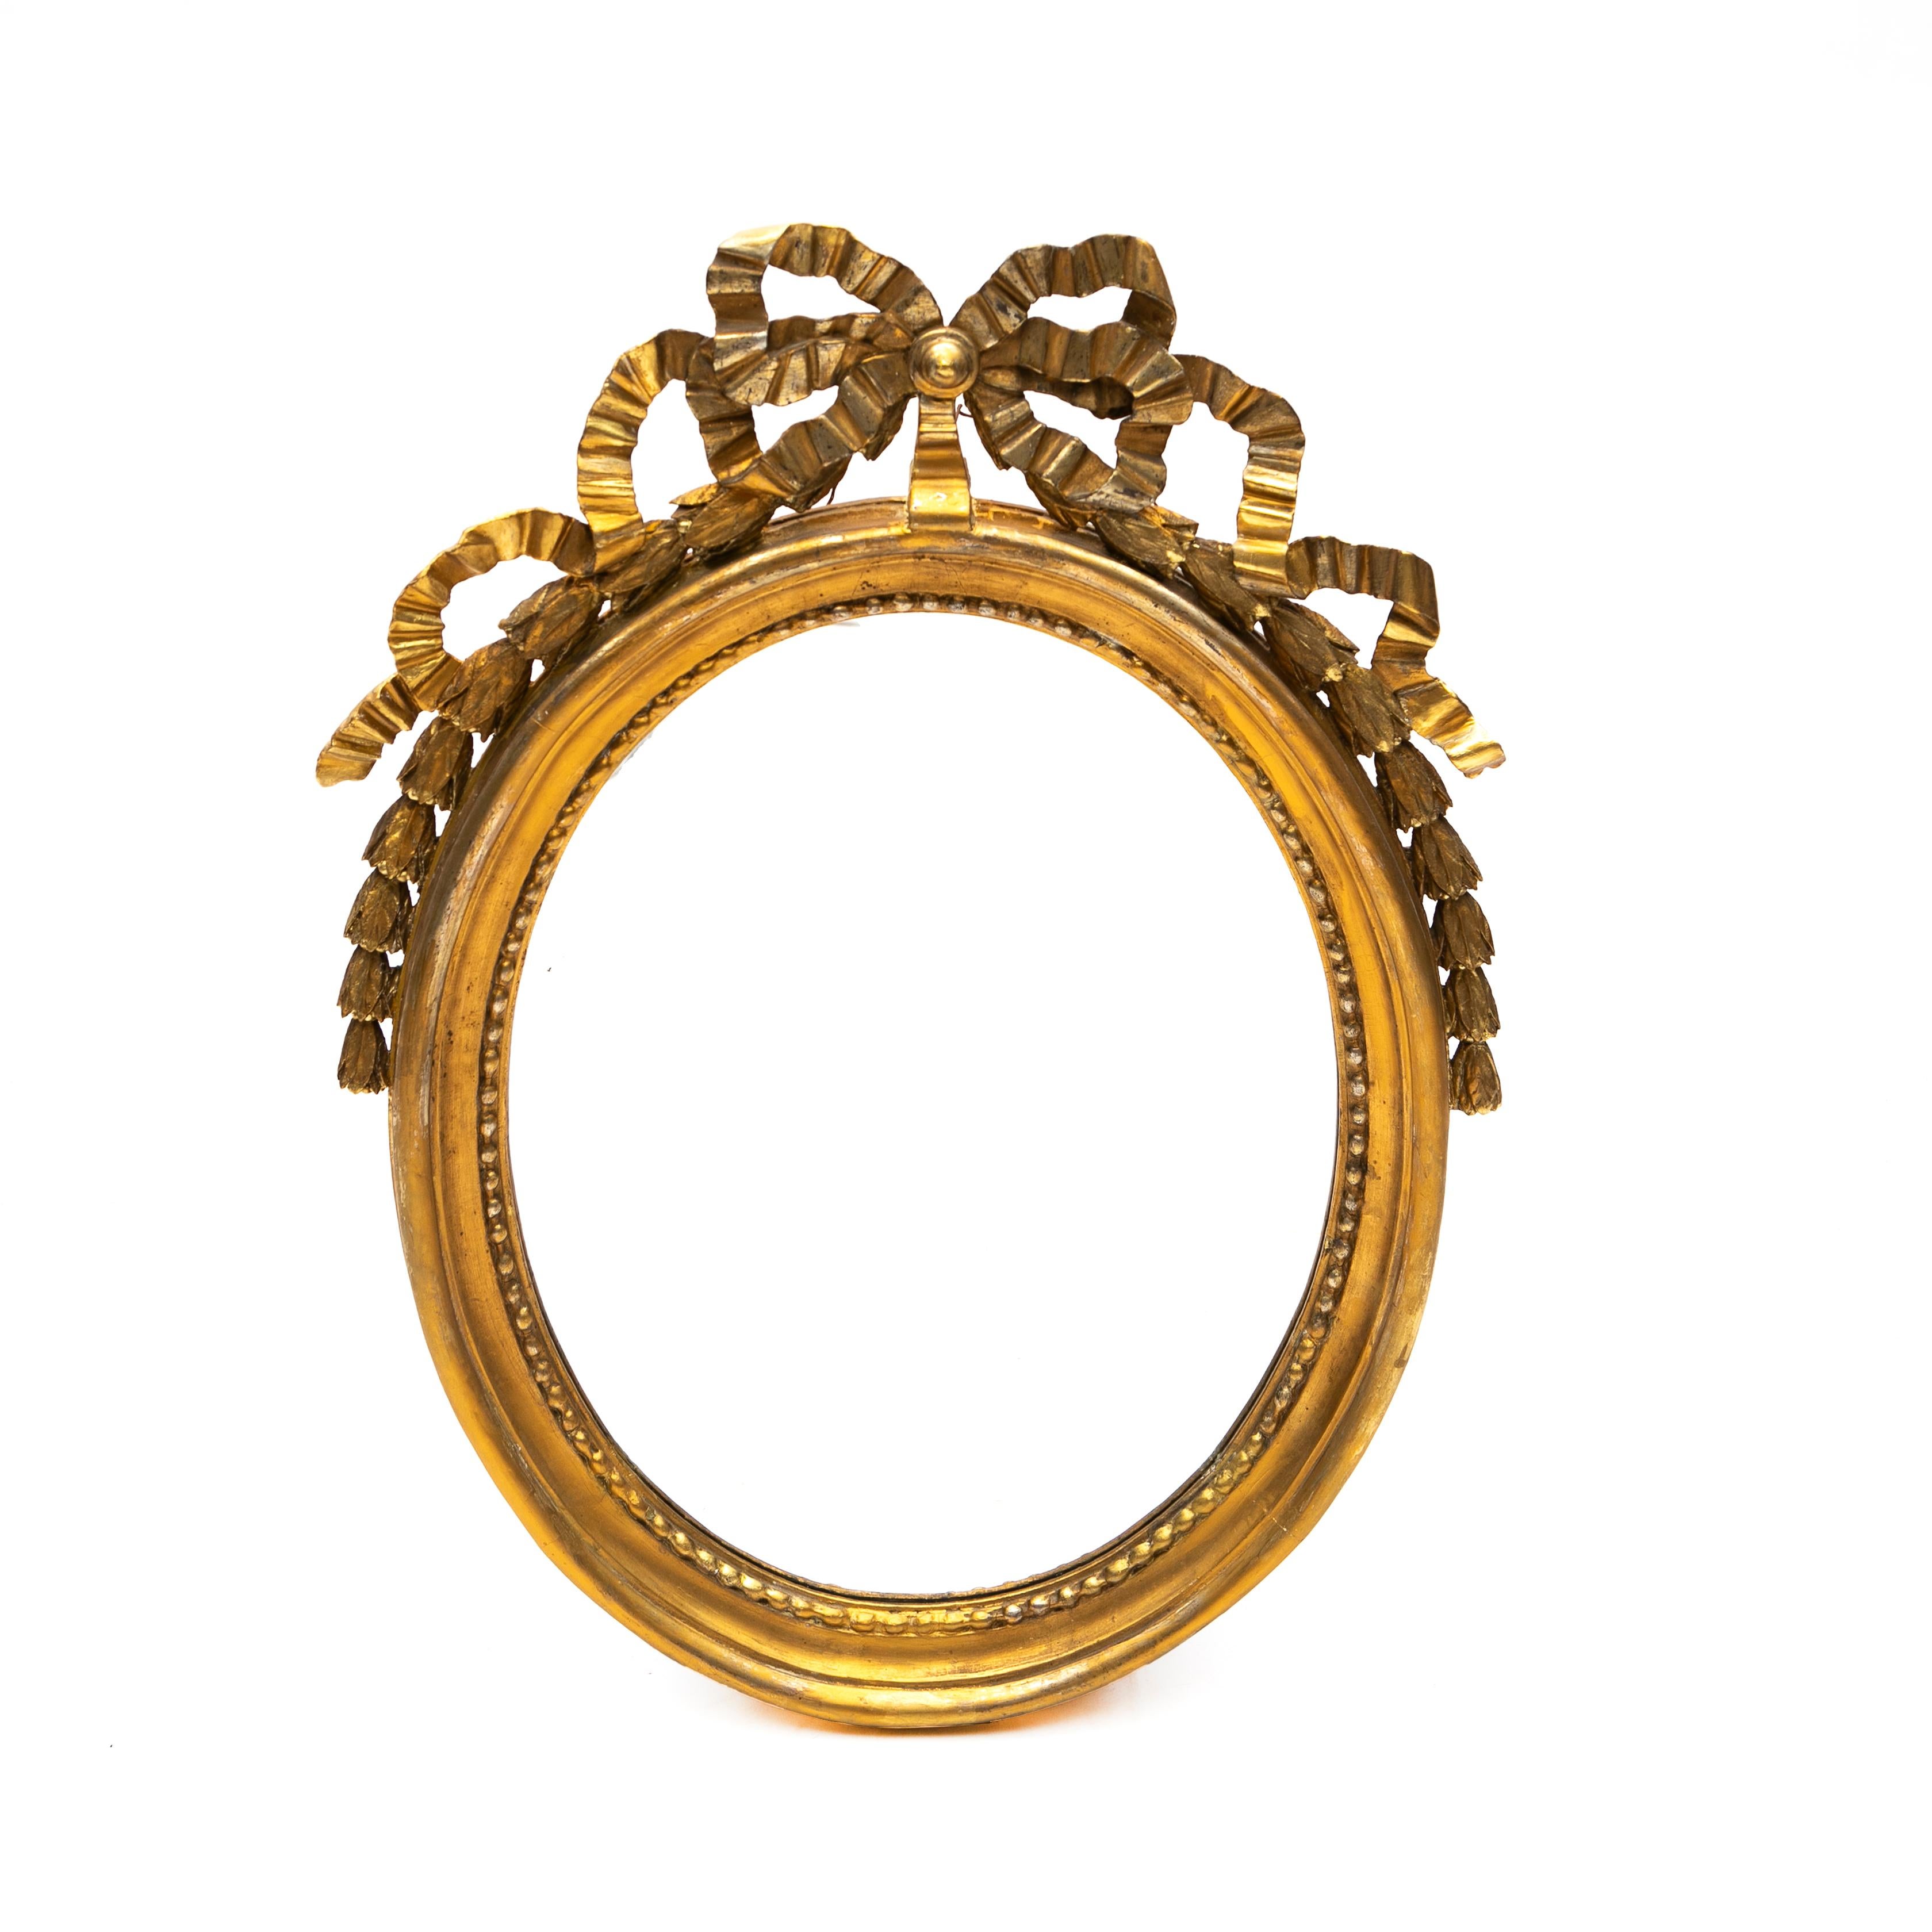 Classic Gustavian or Louis Seize carved giltwood wall mirror.
Features an oval mirror with pearl beading on the interior perimeter, exterior frame decorated with a bow-tied ribbon on top and trailing bellflowers along the sides.

Sweden 1780-1790